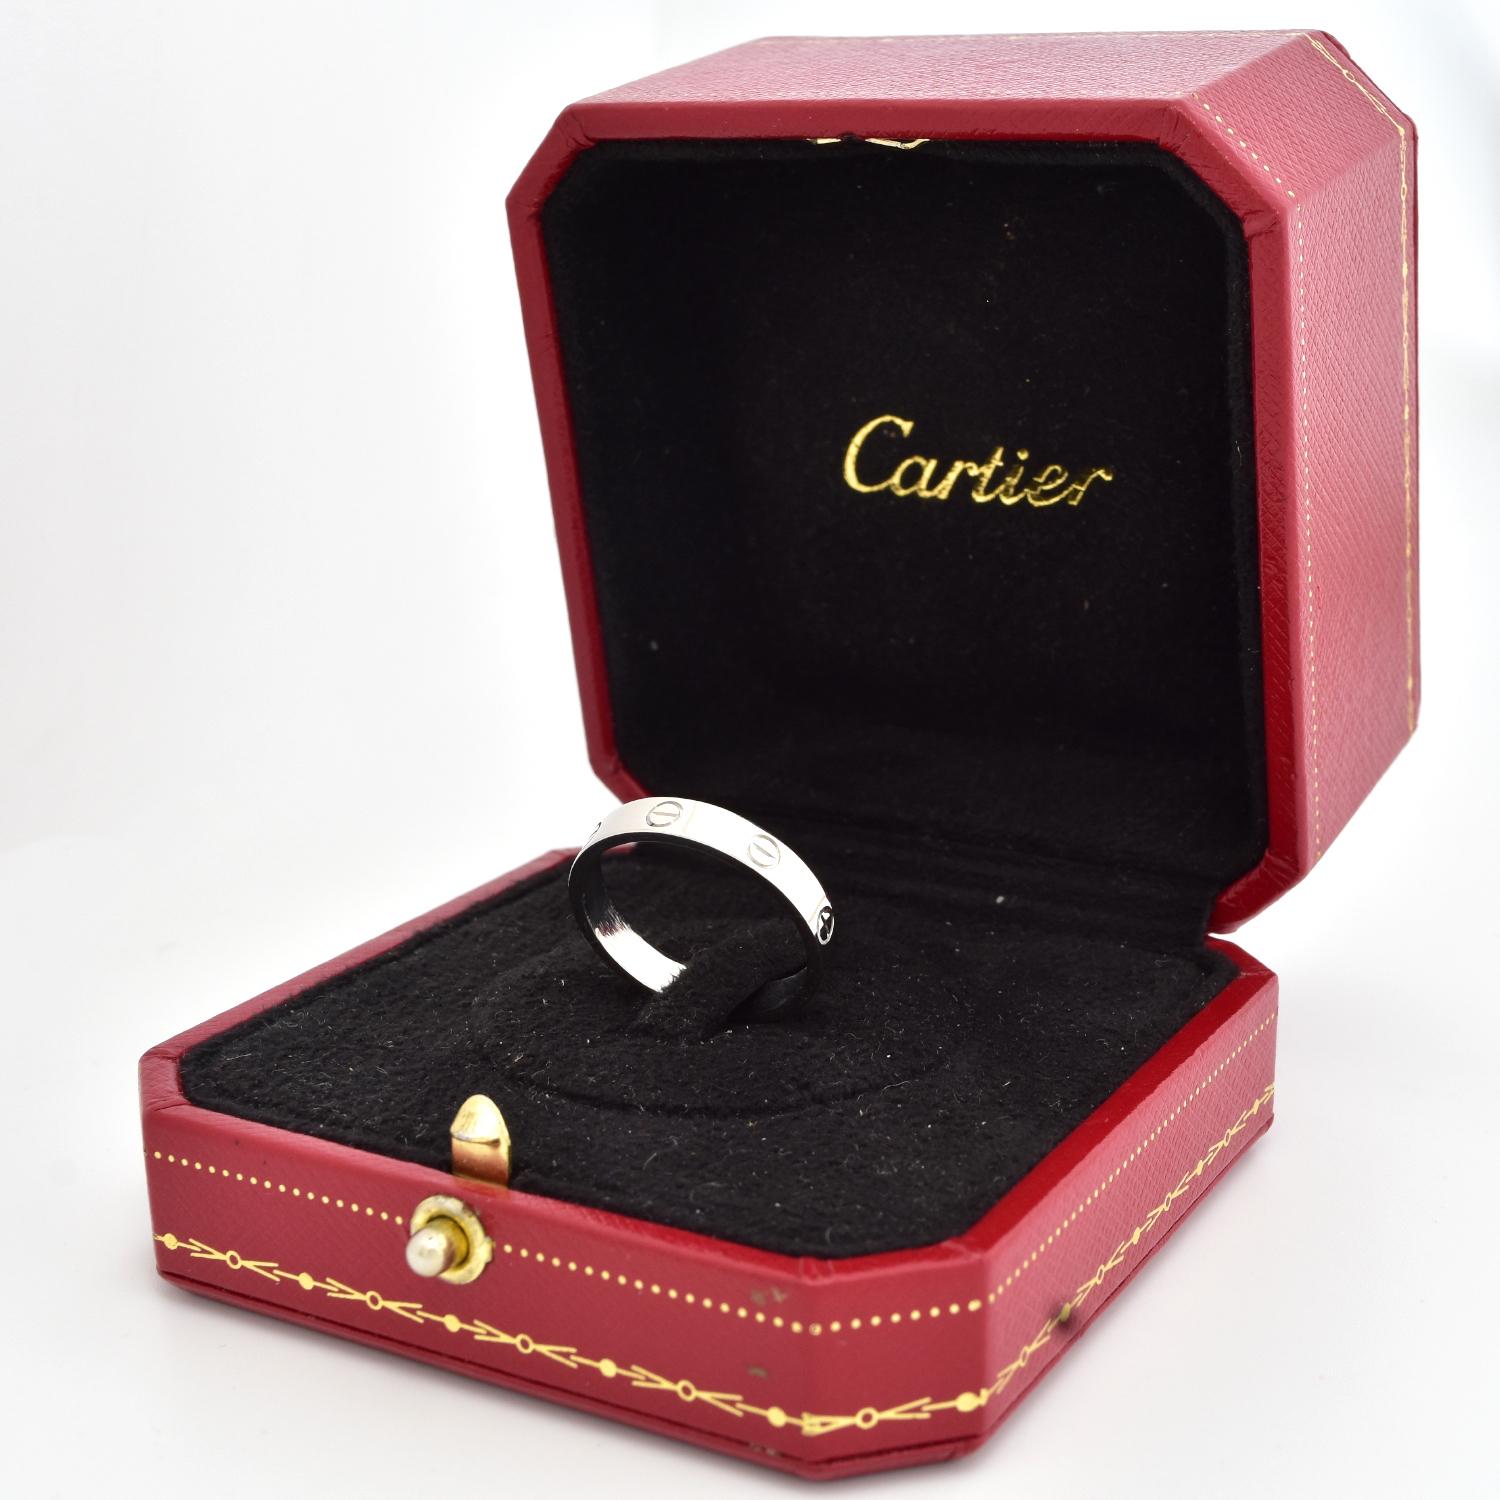 Rare and iconic LOVE ring by Cartier in Platinum 950, size 59 EU - 8 3/4 US, in perfect condition showing little to no signs of wear.